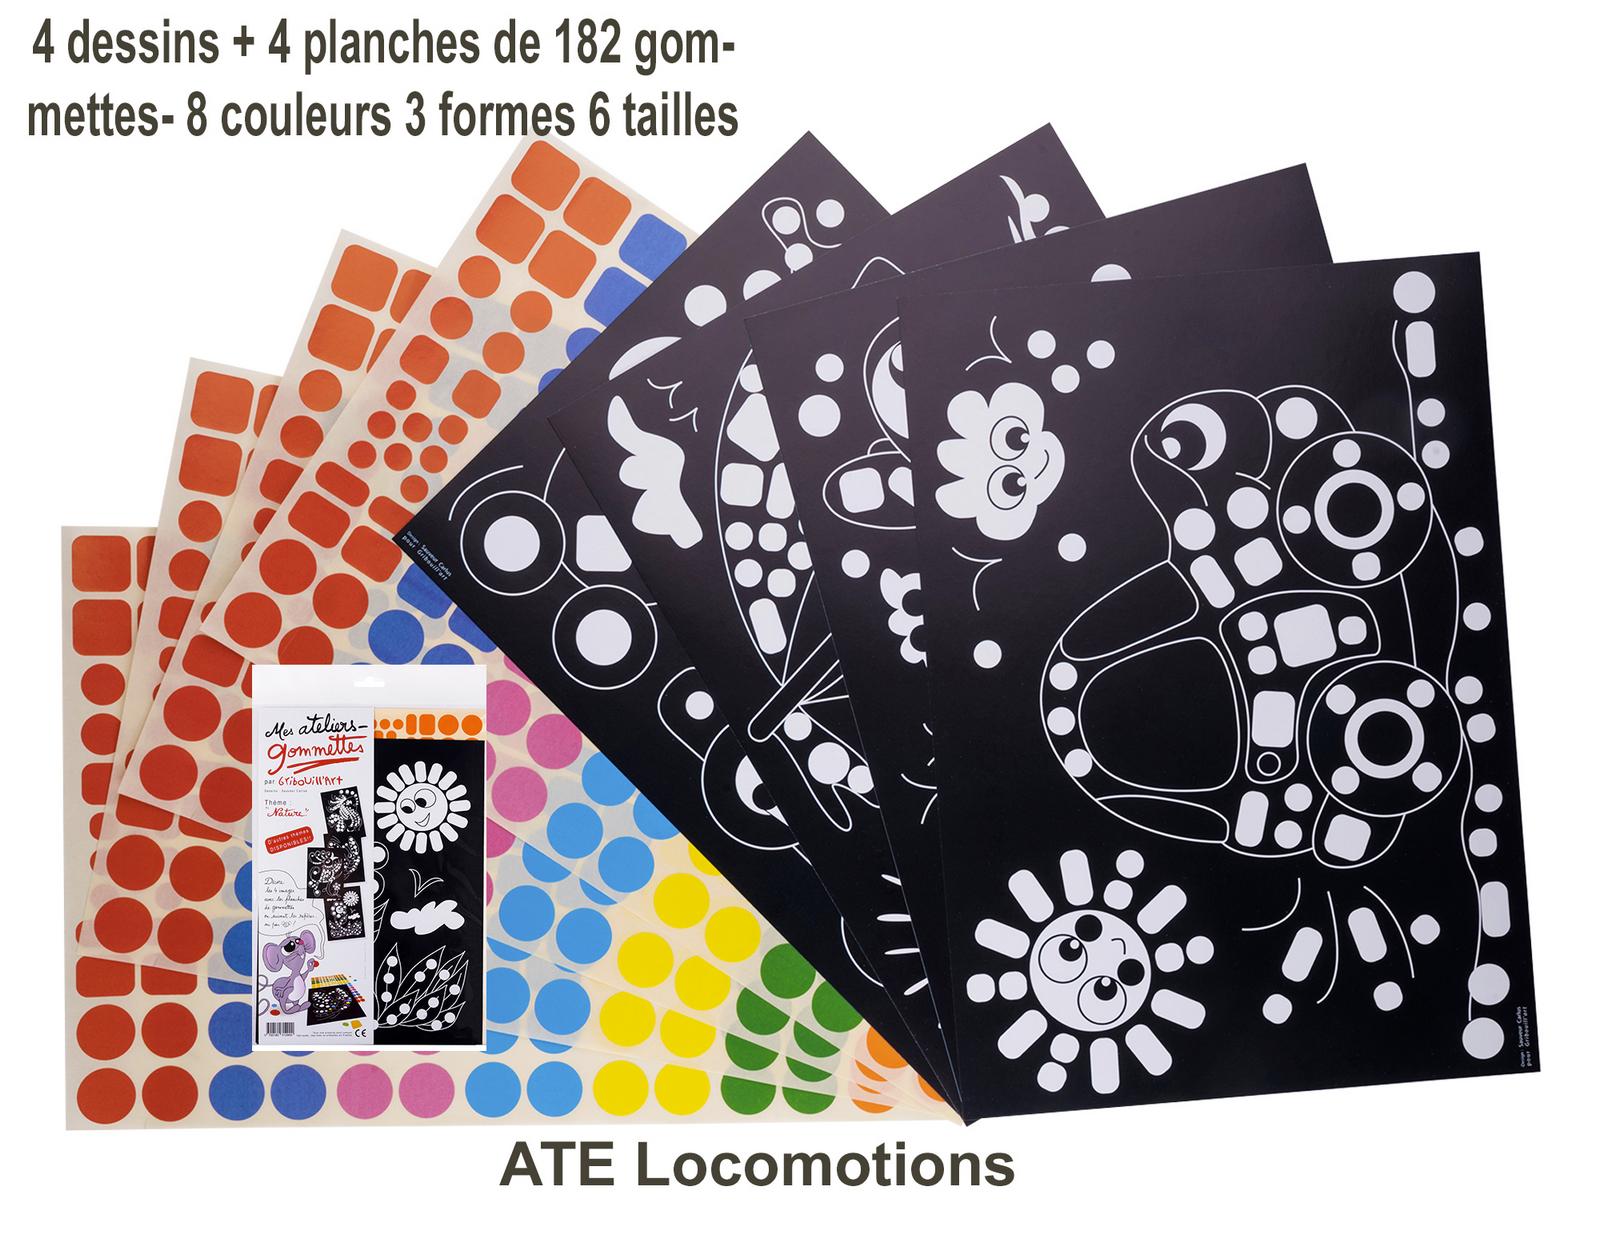 82 -ATE Locomotions